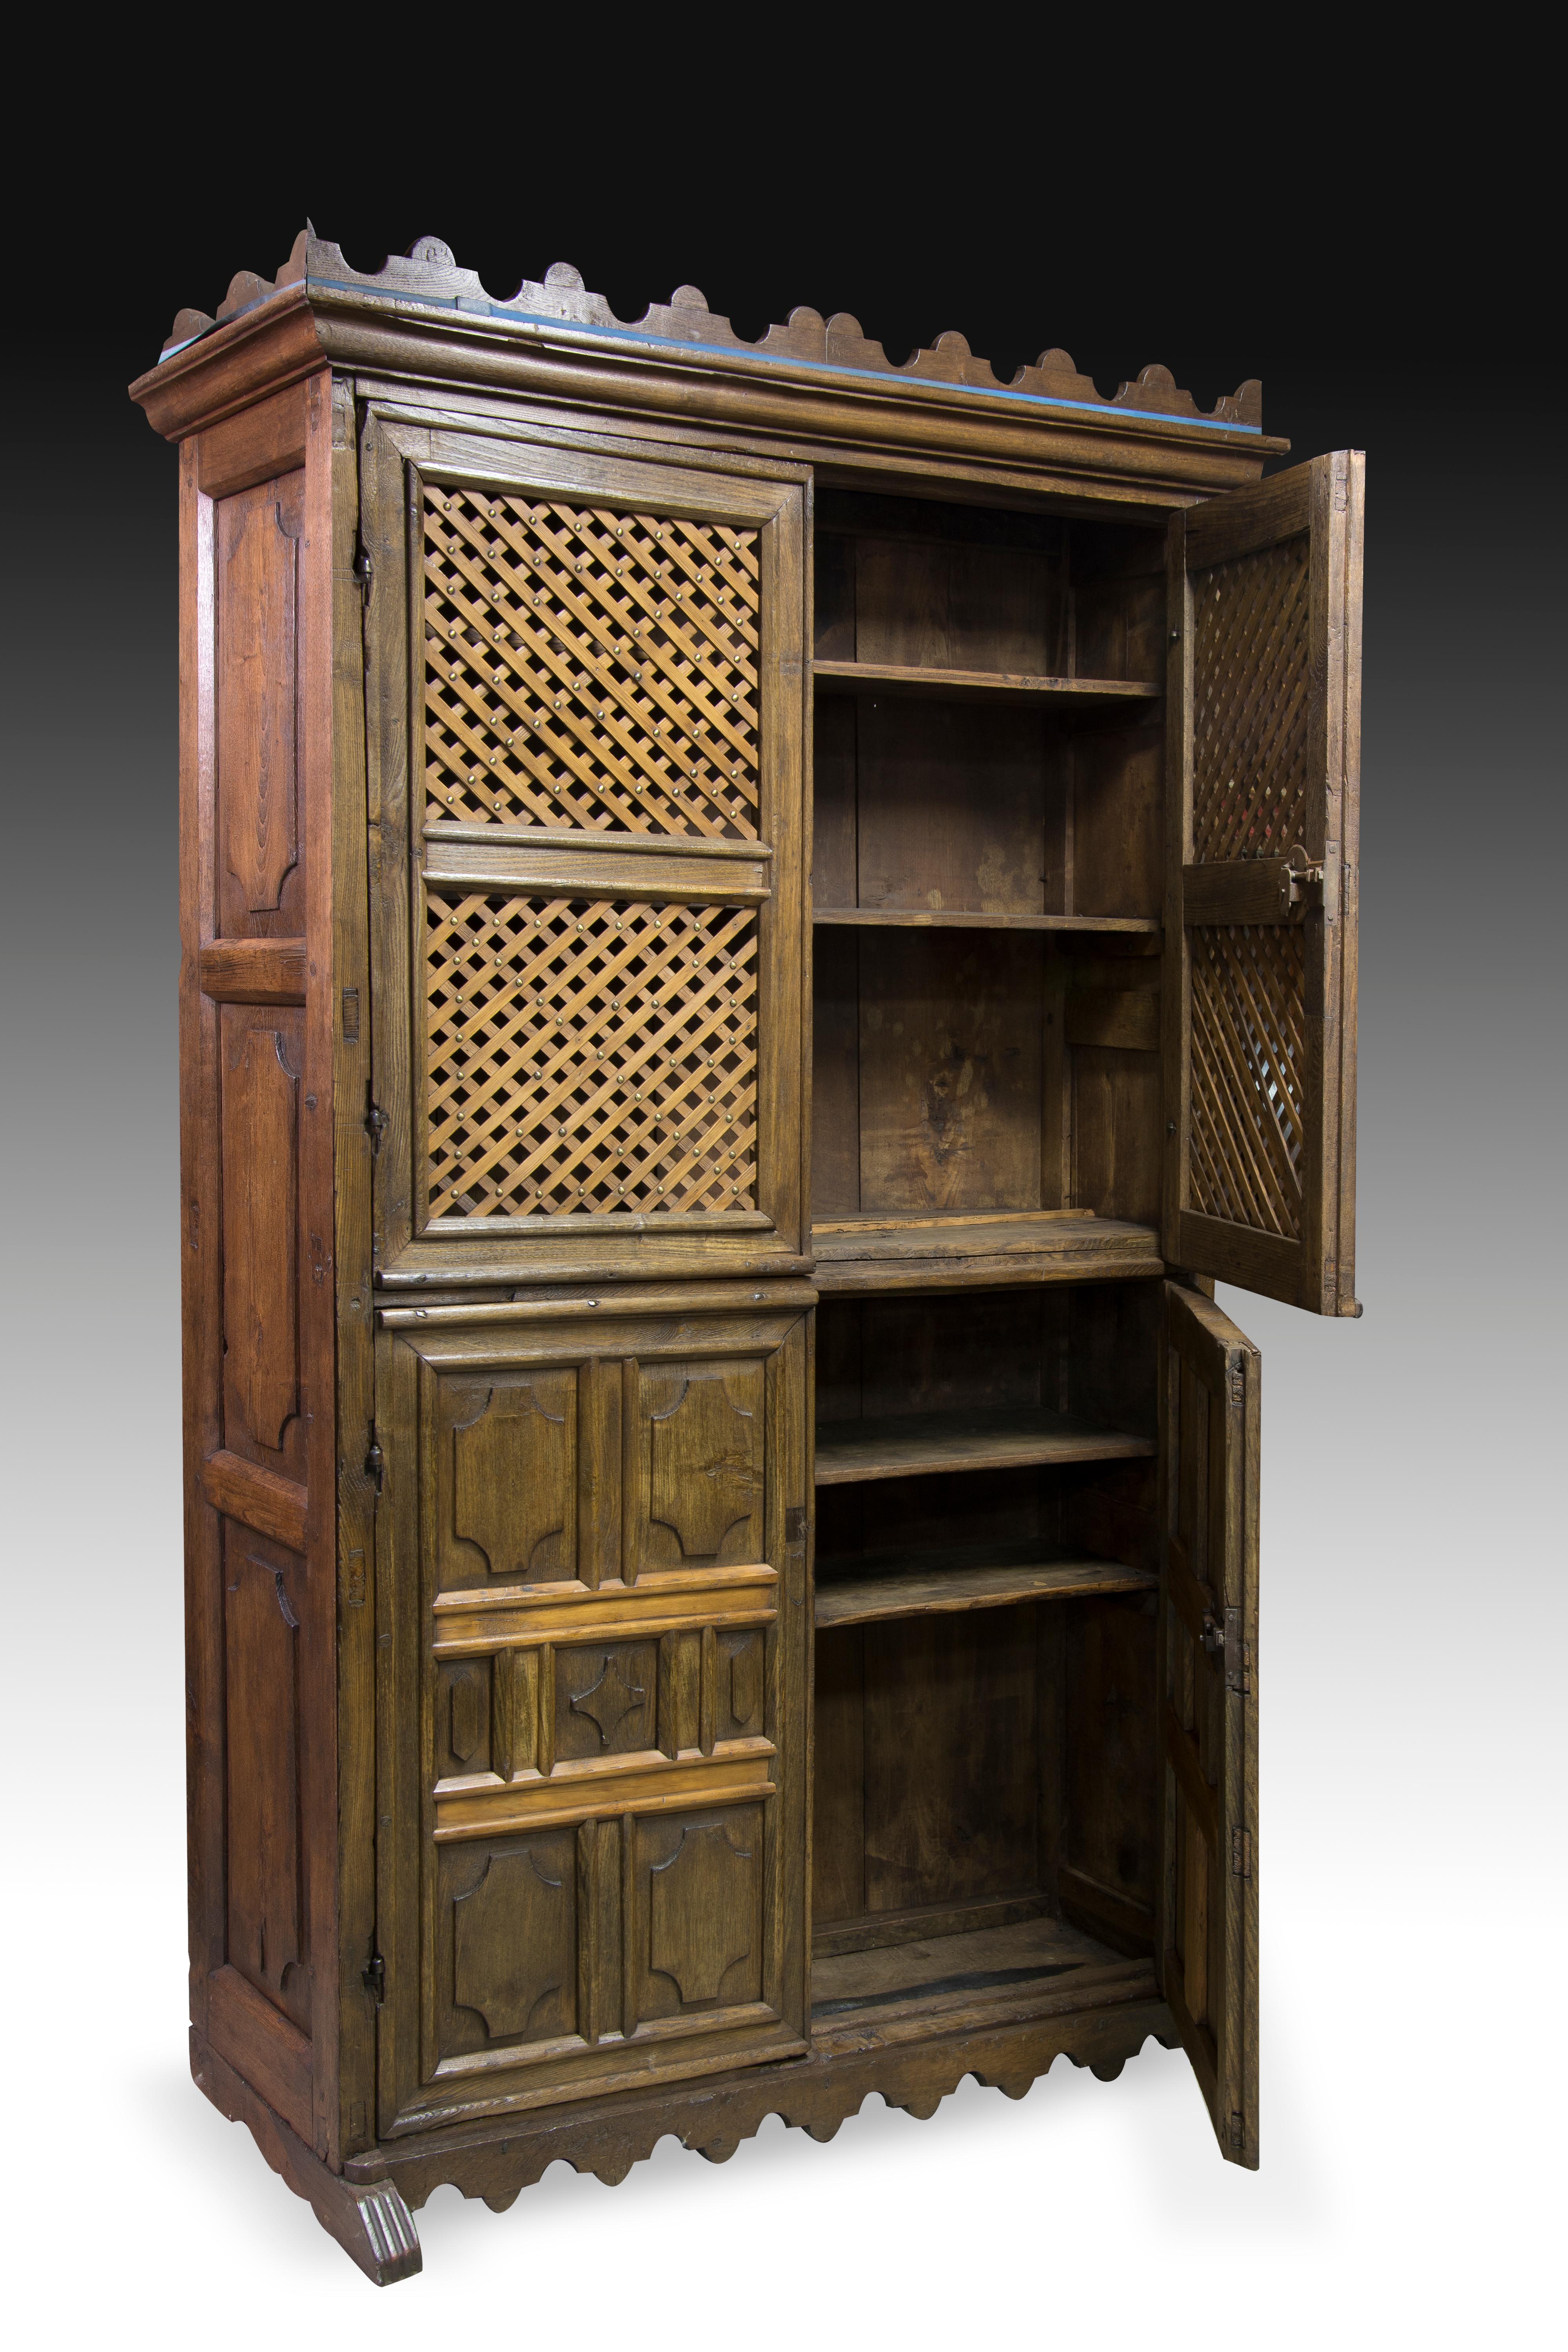 Cupboard or kitchen cabinet with the upper area with a 